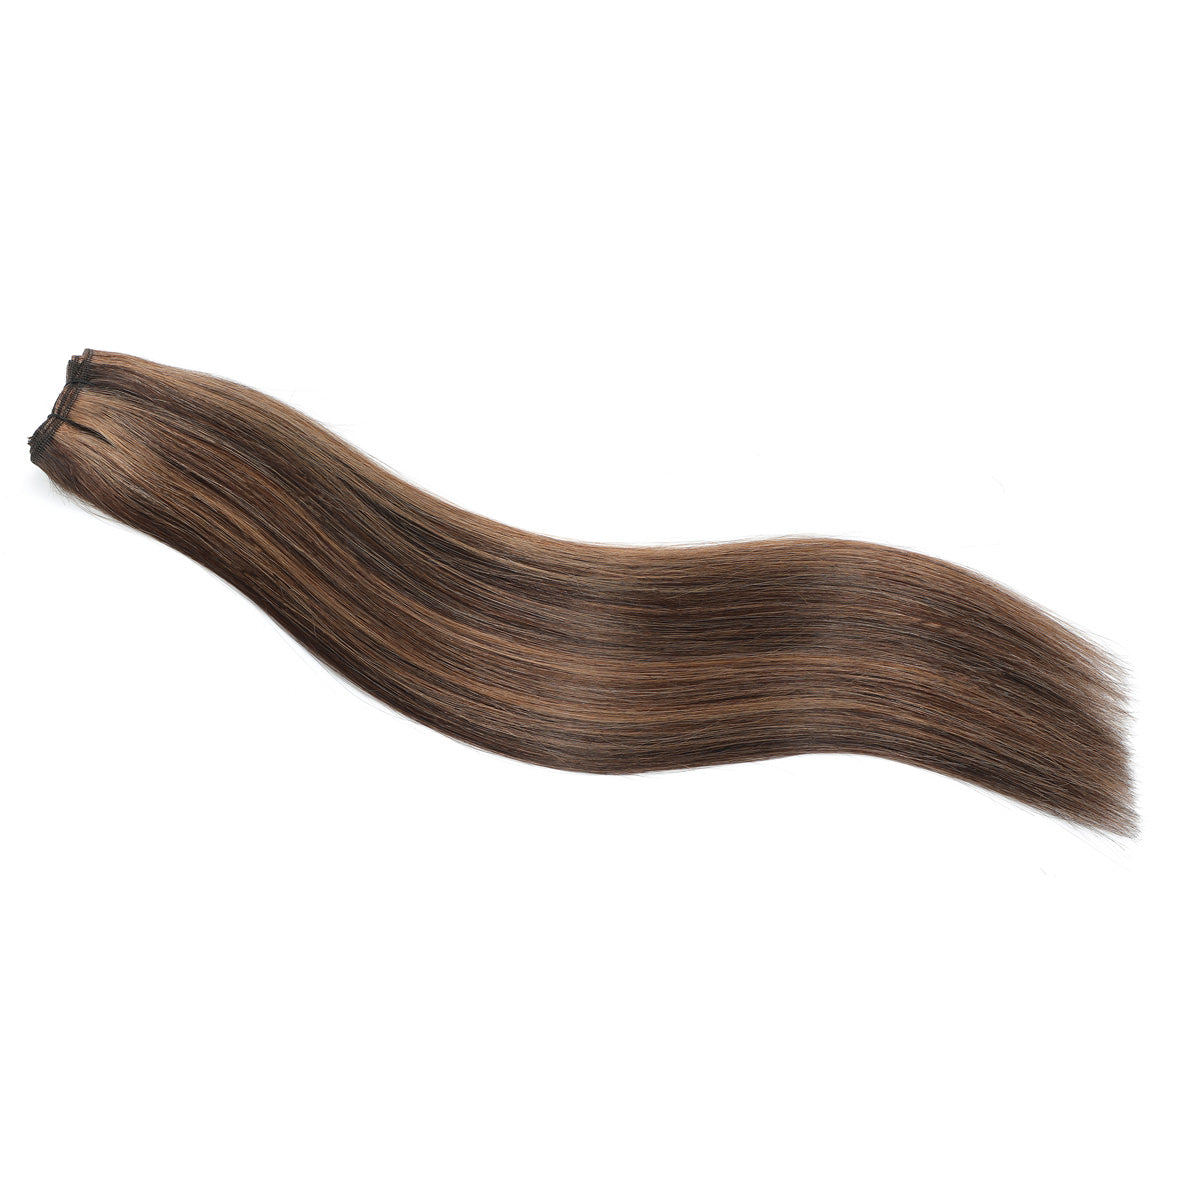 Weft Hair Extensions Brown and Caramel Highlights